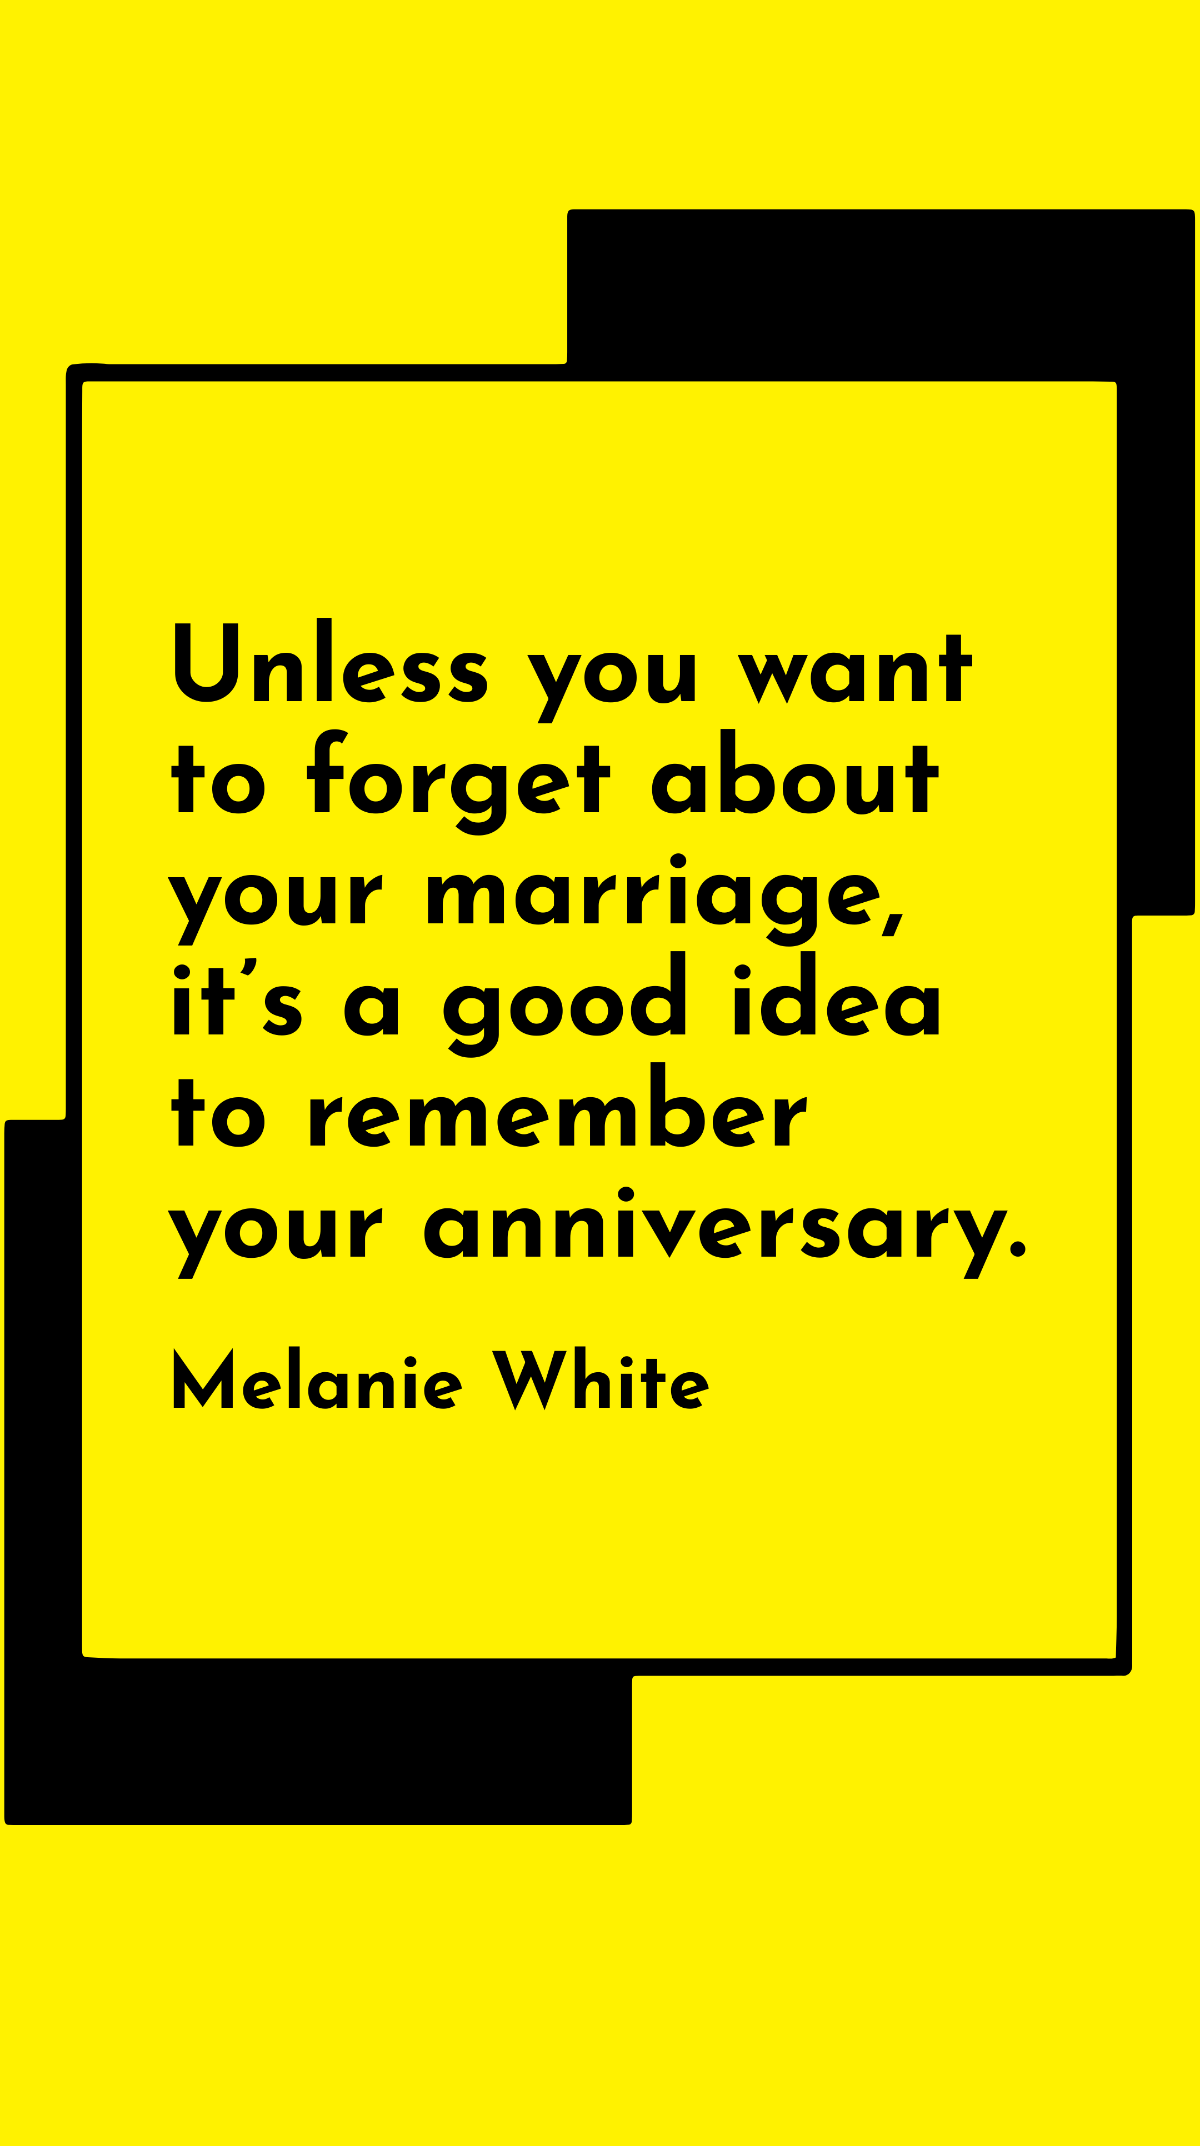 Melanie White - Unless you want to forget about your marriage, it’s a good idea to remember your anniversary.